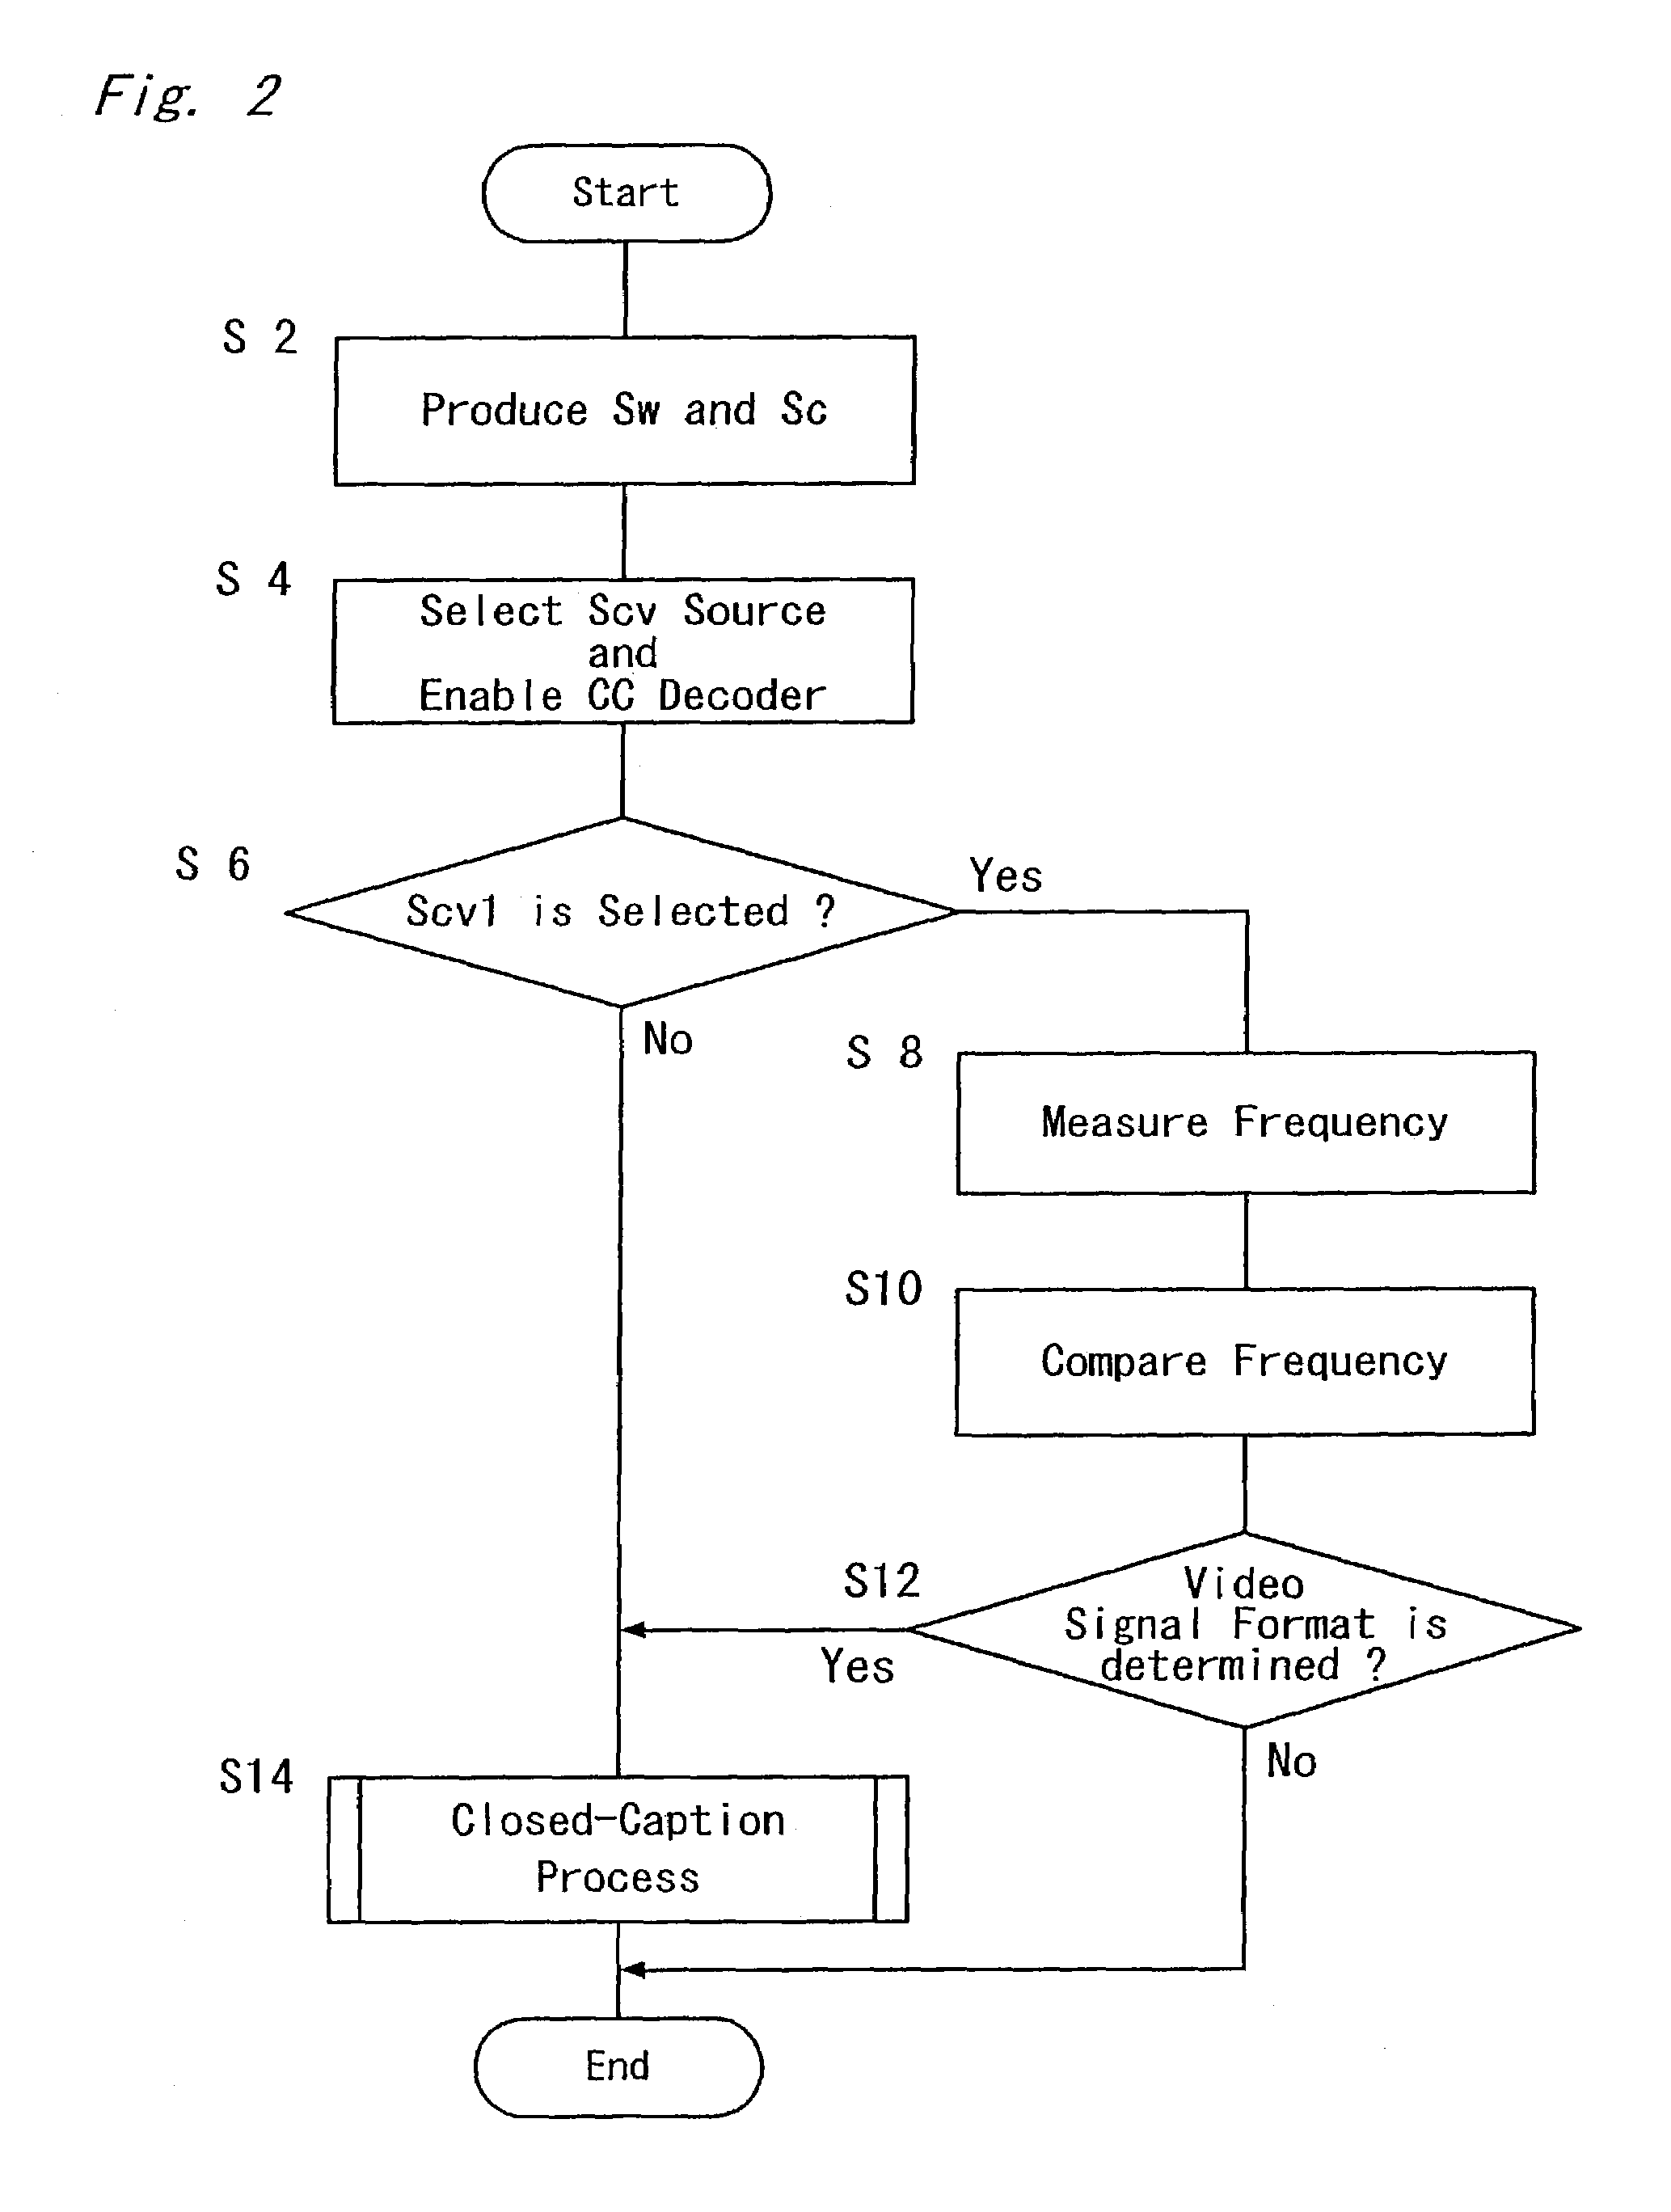 Method and apparatus for processing a plurality of format types of video signals which include closed-caption data